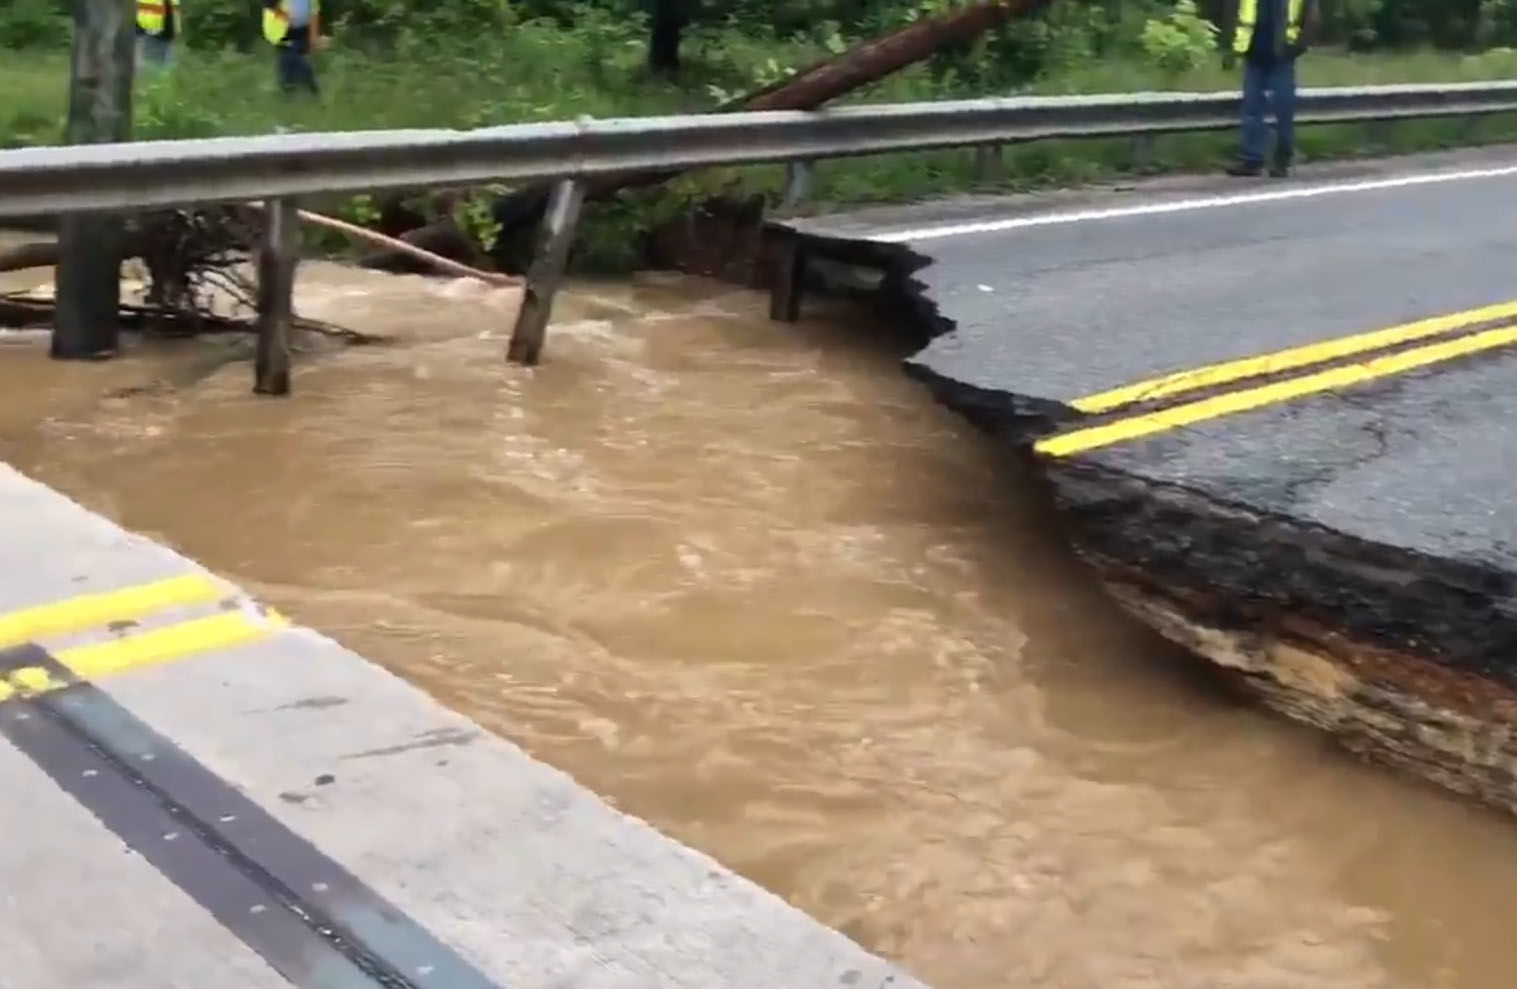 Md. 198 was a complete washout from the raging floodwaters. (WTOP/Melissa Howell)